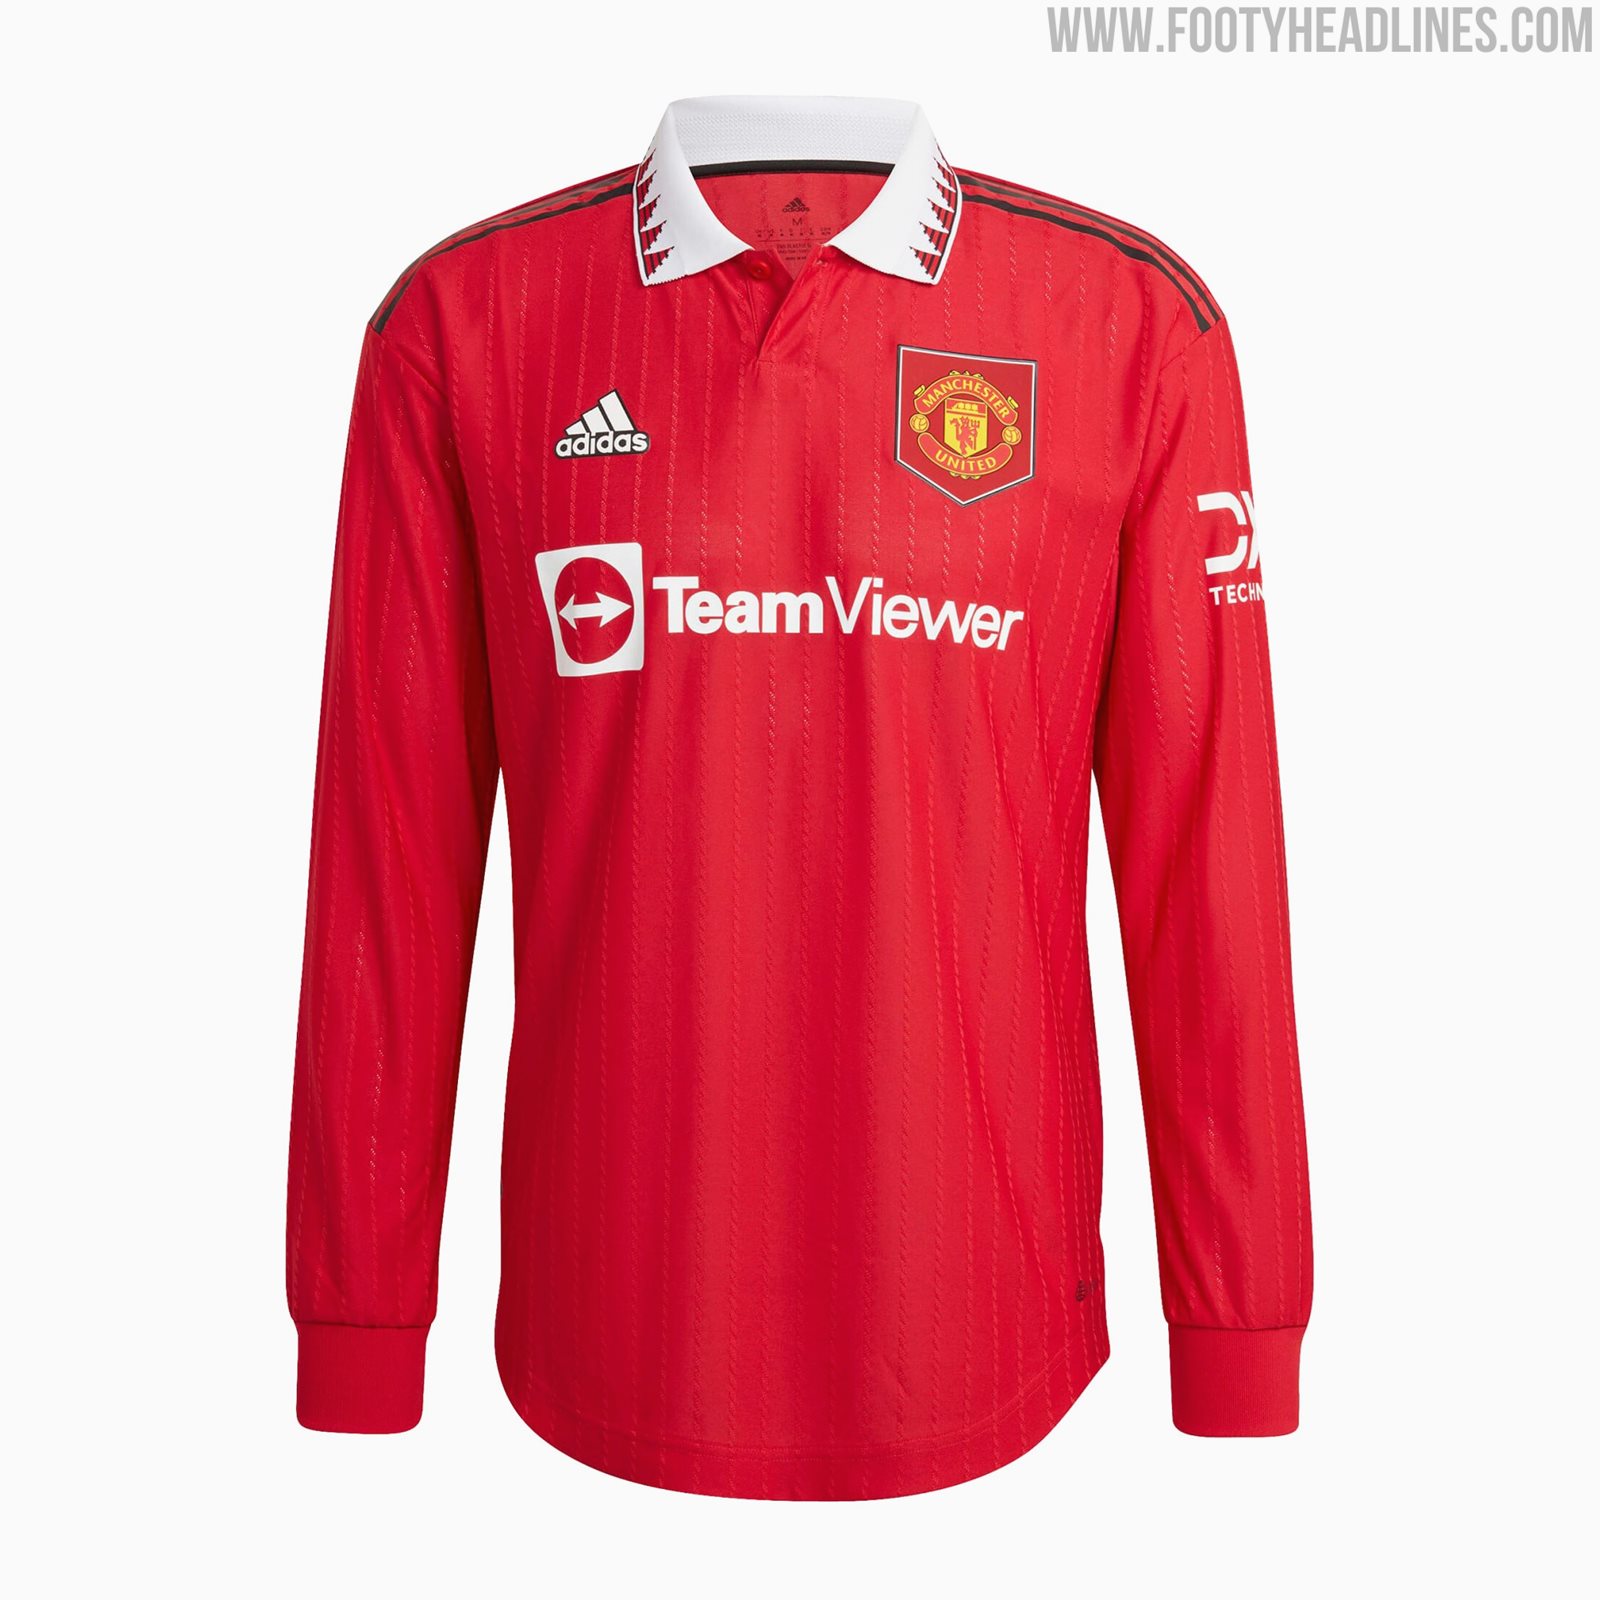 Manchester 22-23 Home Kit Released - Footy Headlines